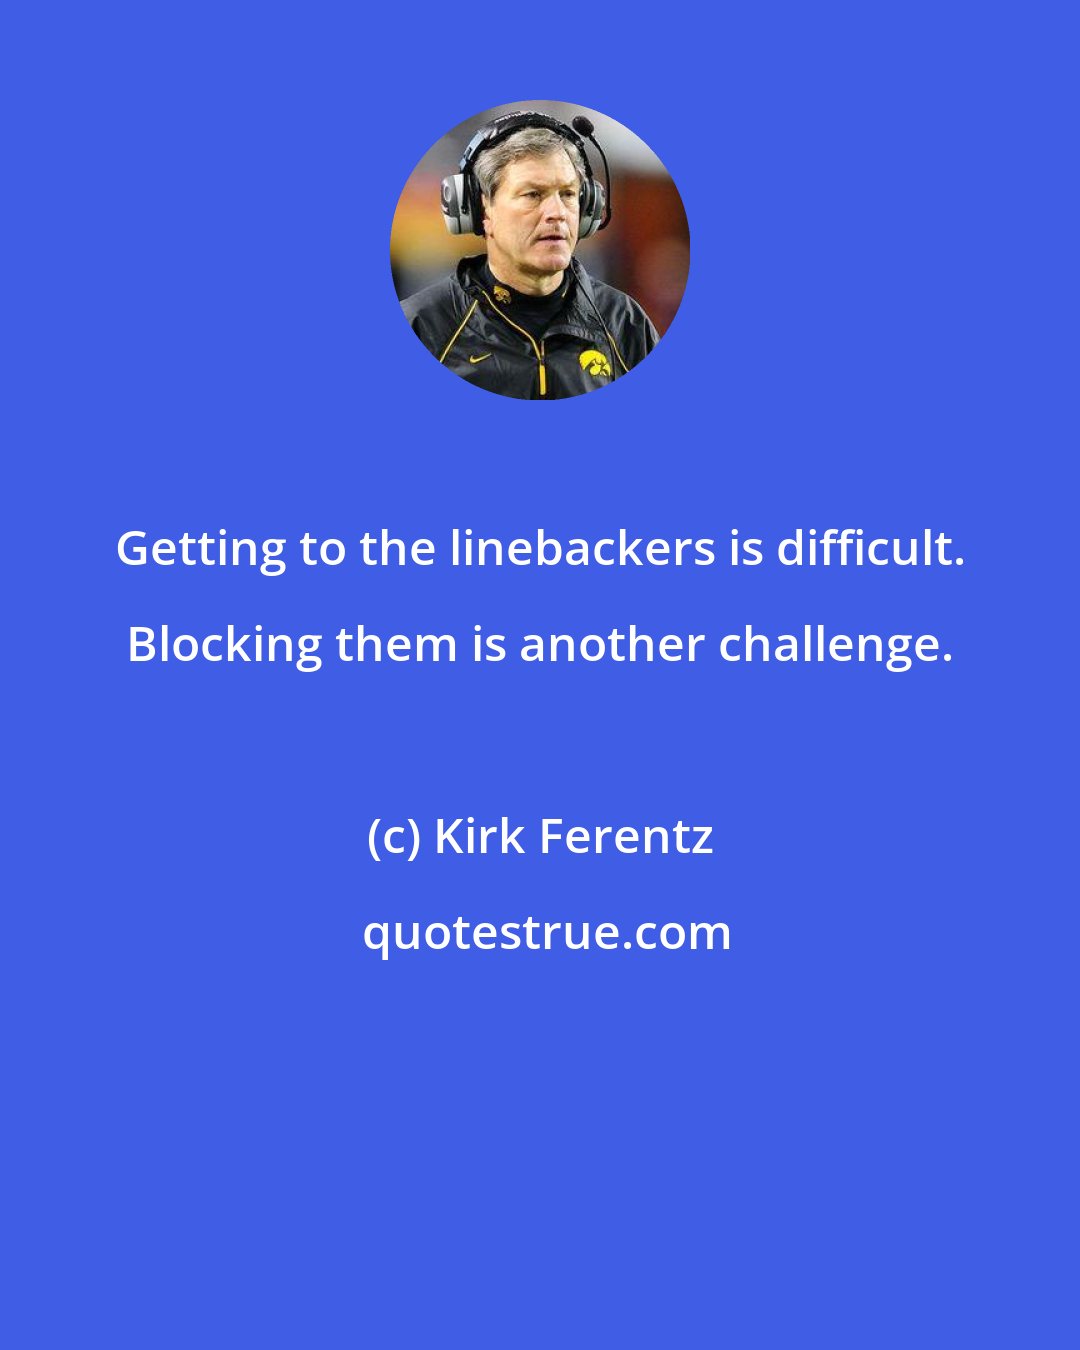 Kirk Ferentz: Getting to the linebackers is difficult. Blocking them is another challenge.